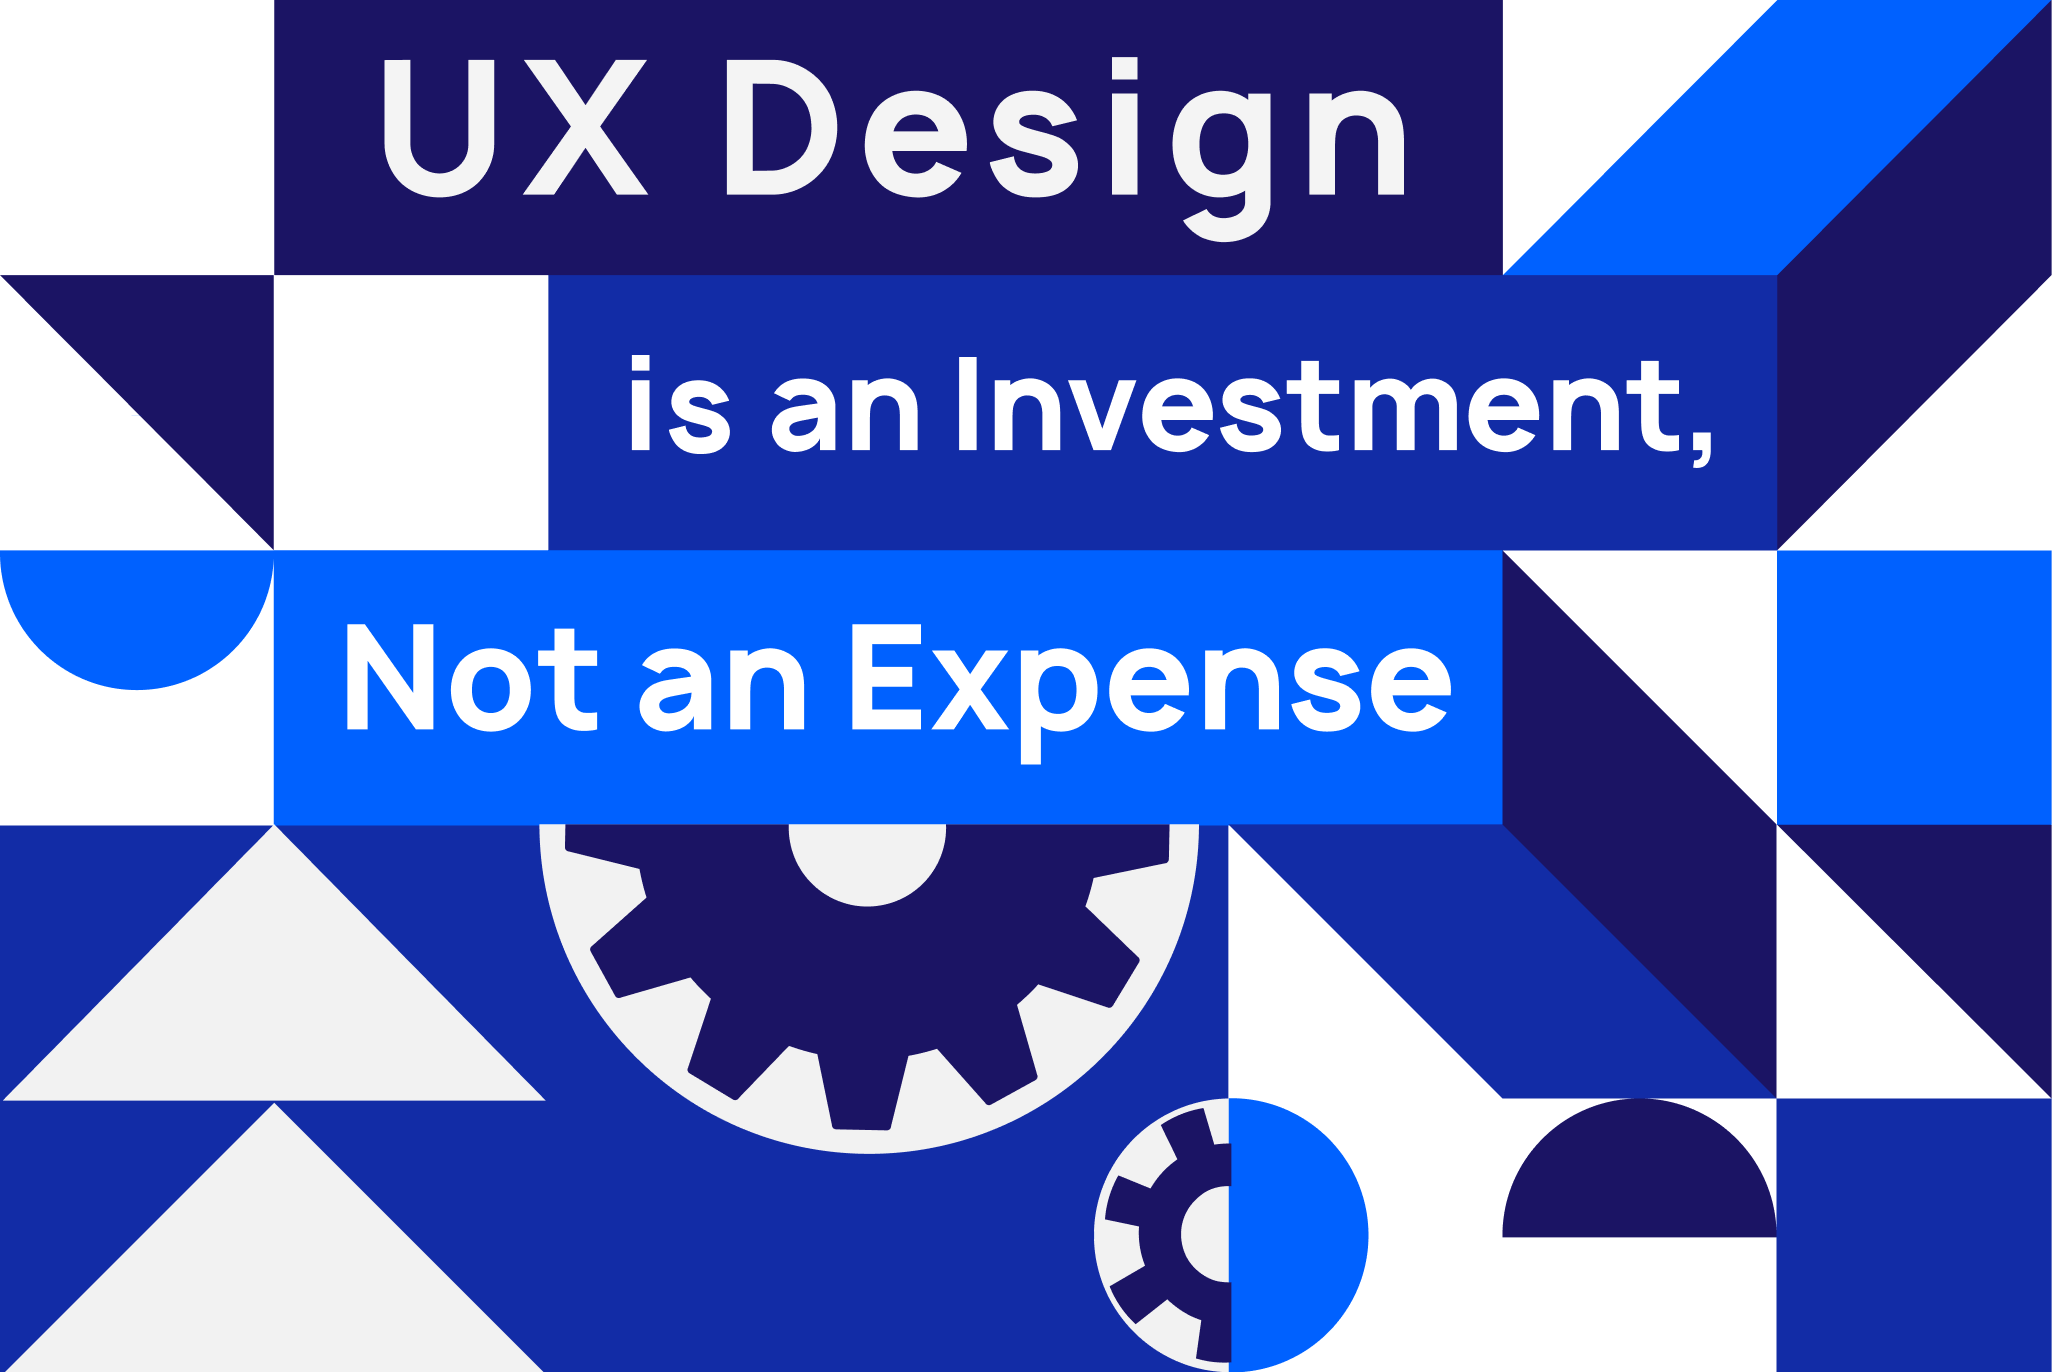 UX is an investment not an expense